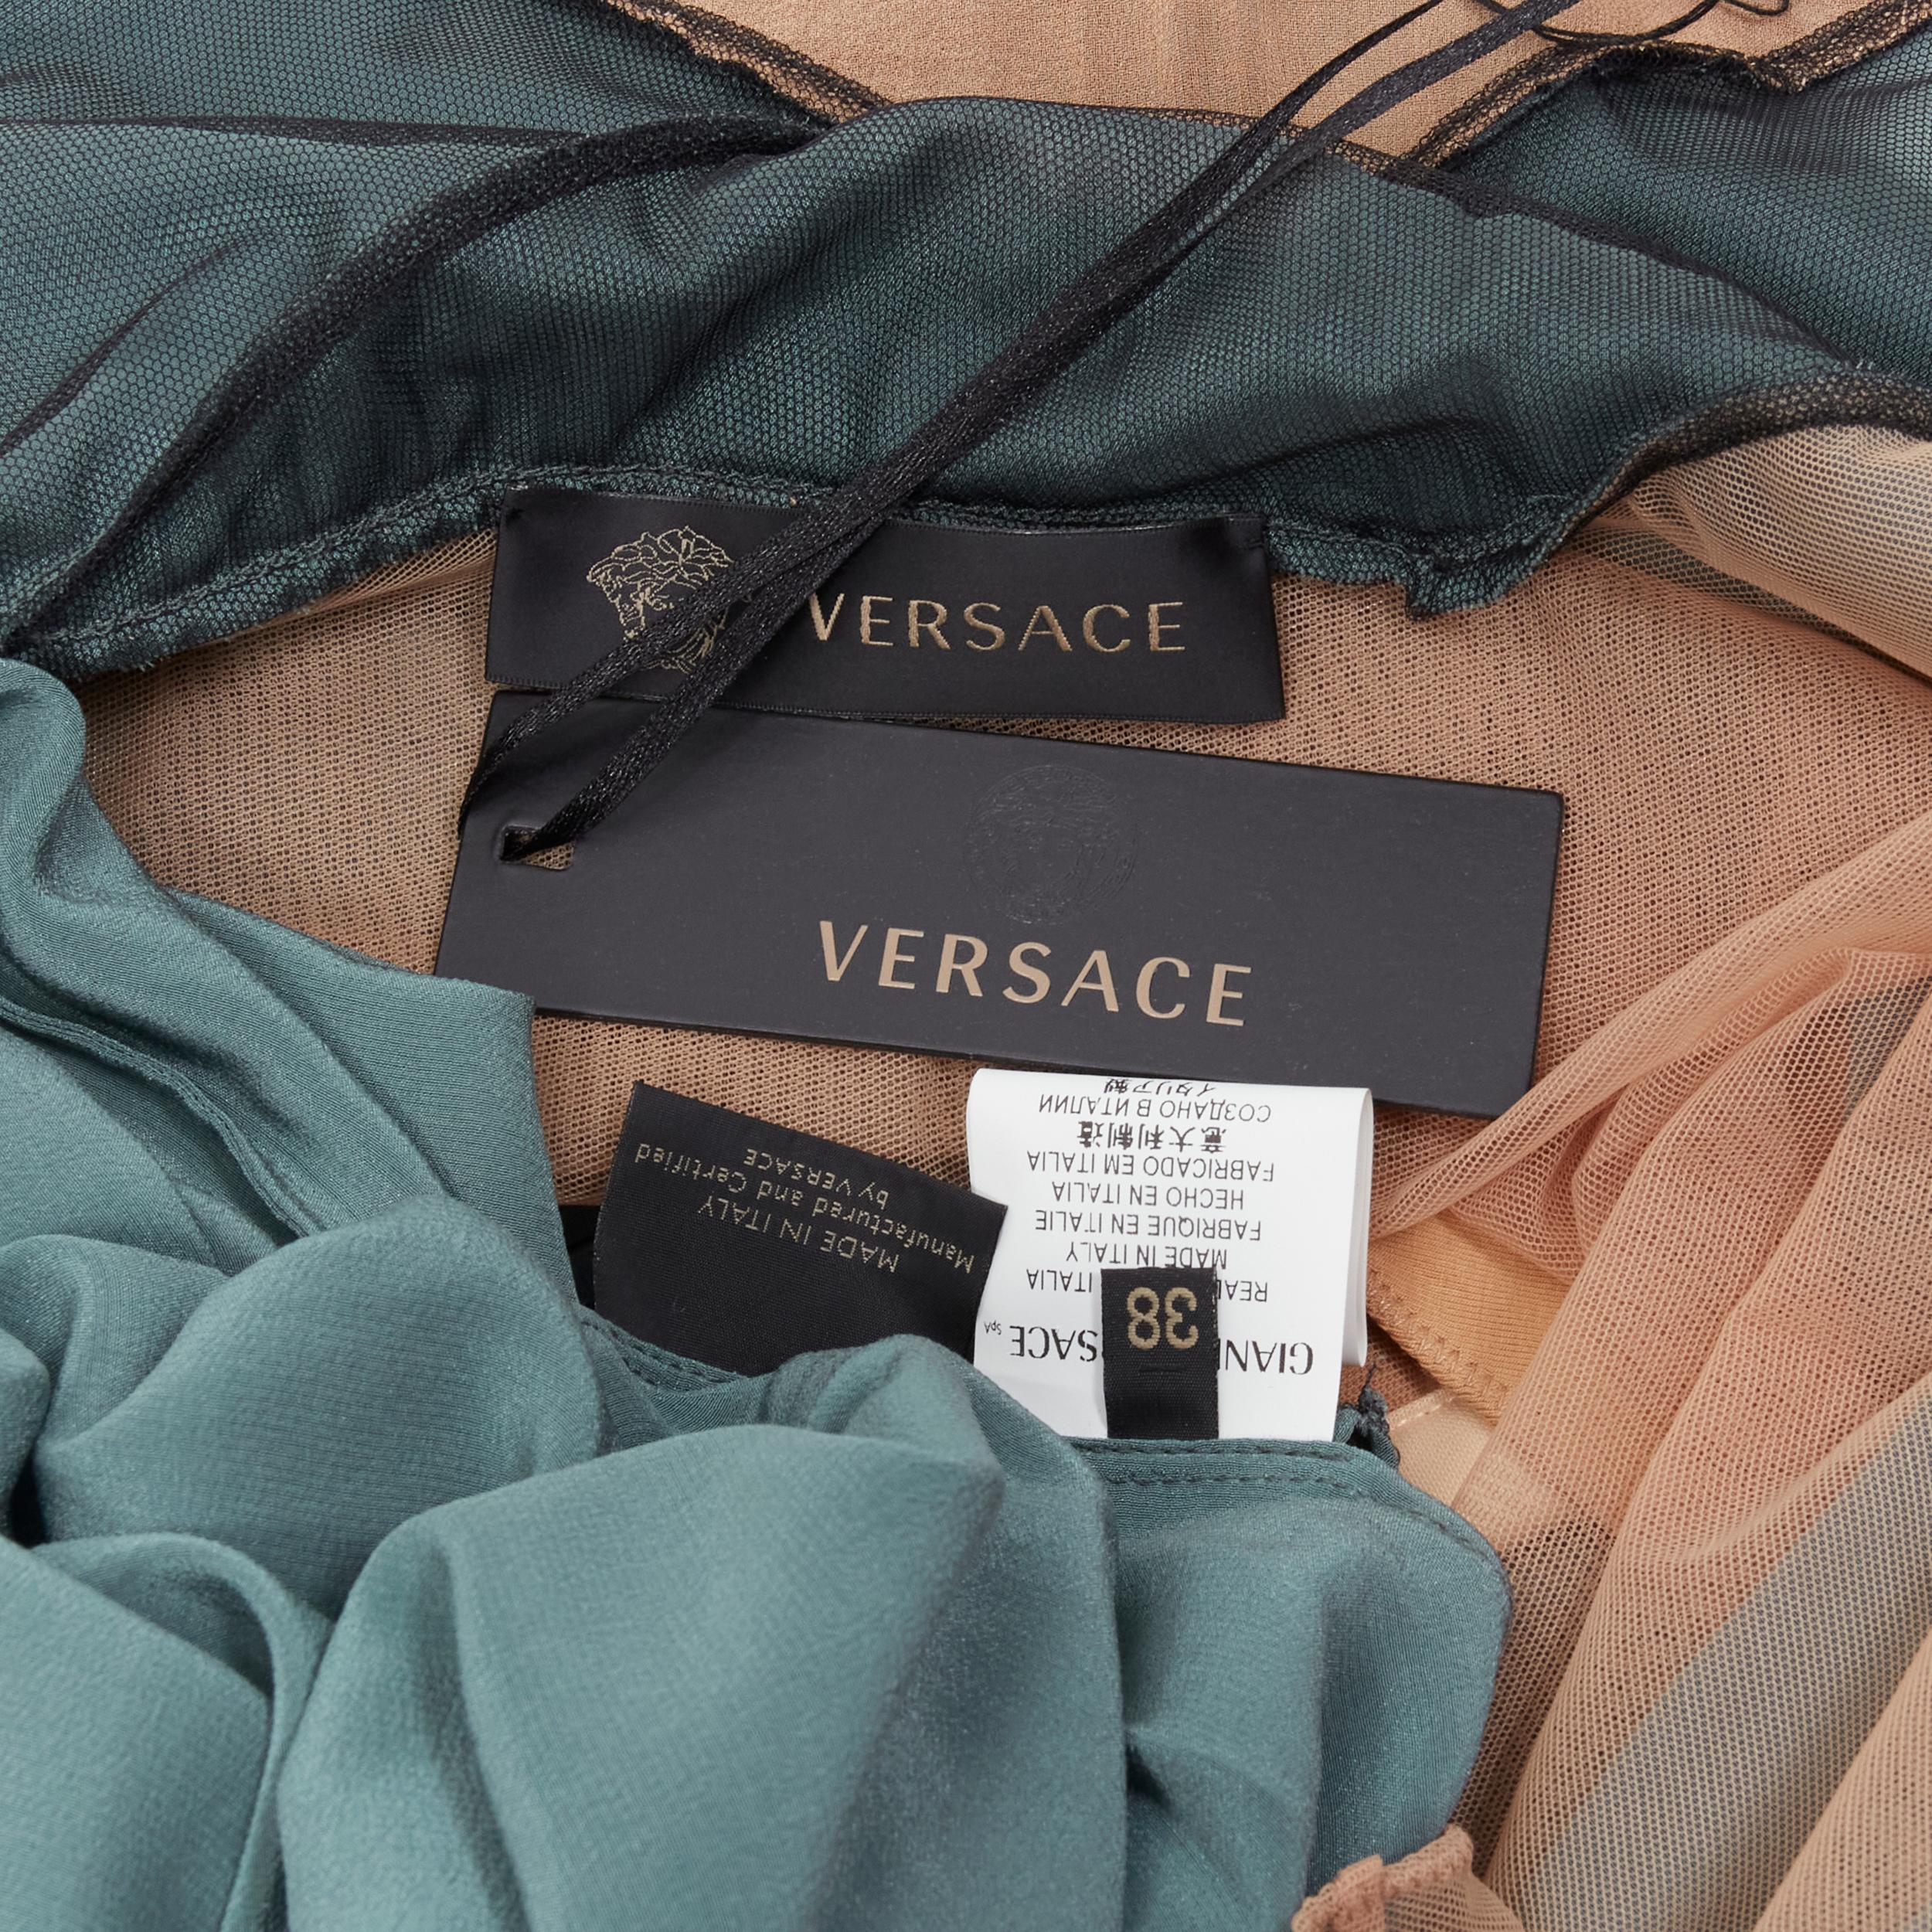 VERSACE french lace bust teal blue silk spaghetti strap full gown dress IT38 S 7